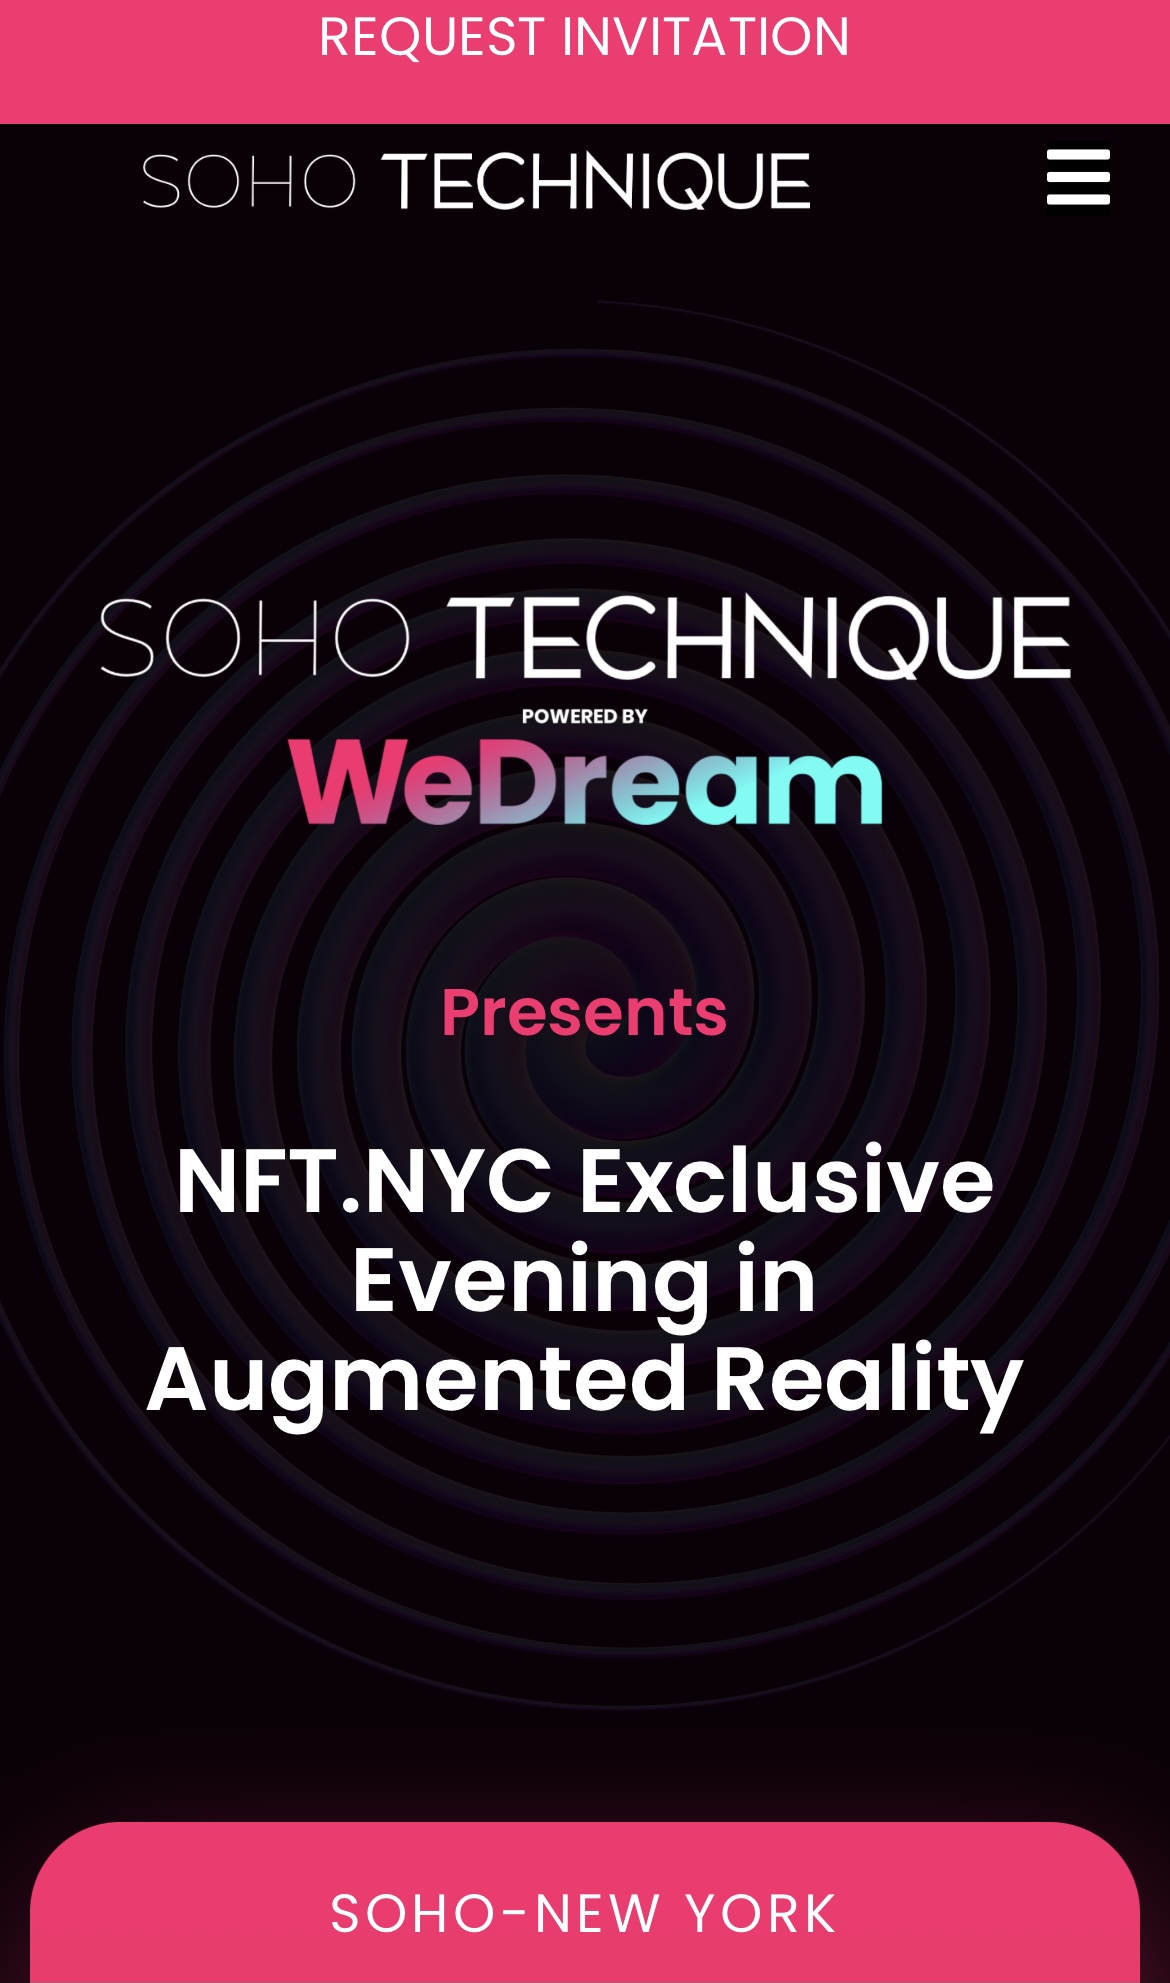 SoHo Technique Powered By WeDream Presents NFT.NYC Exclusive Evening in Augmented Reality June 22nd, 2022 - The Hollywood Digest